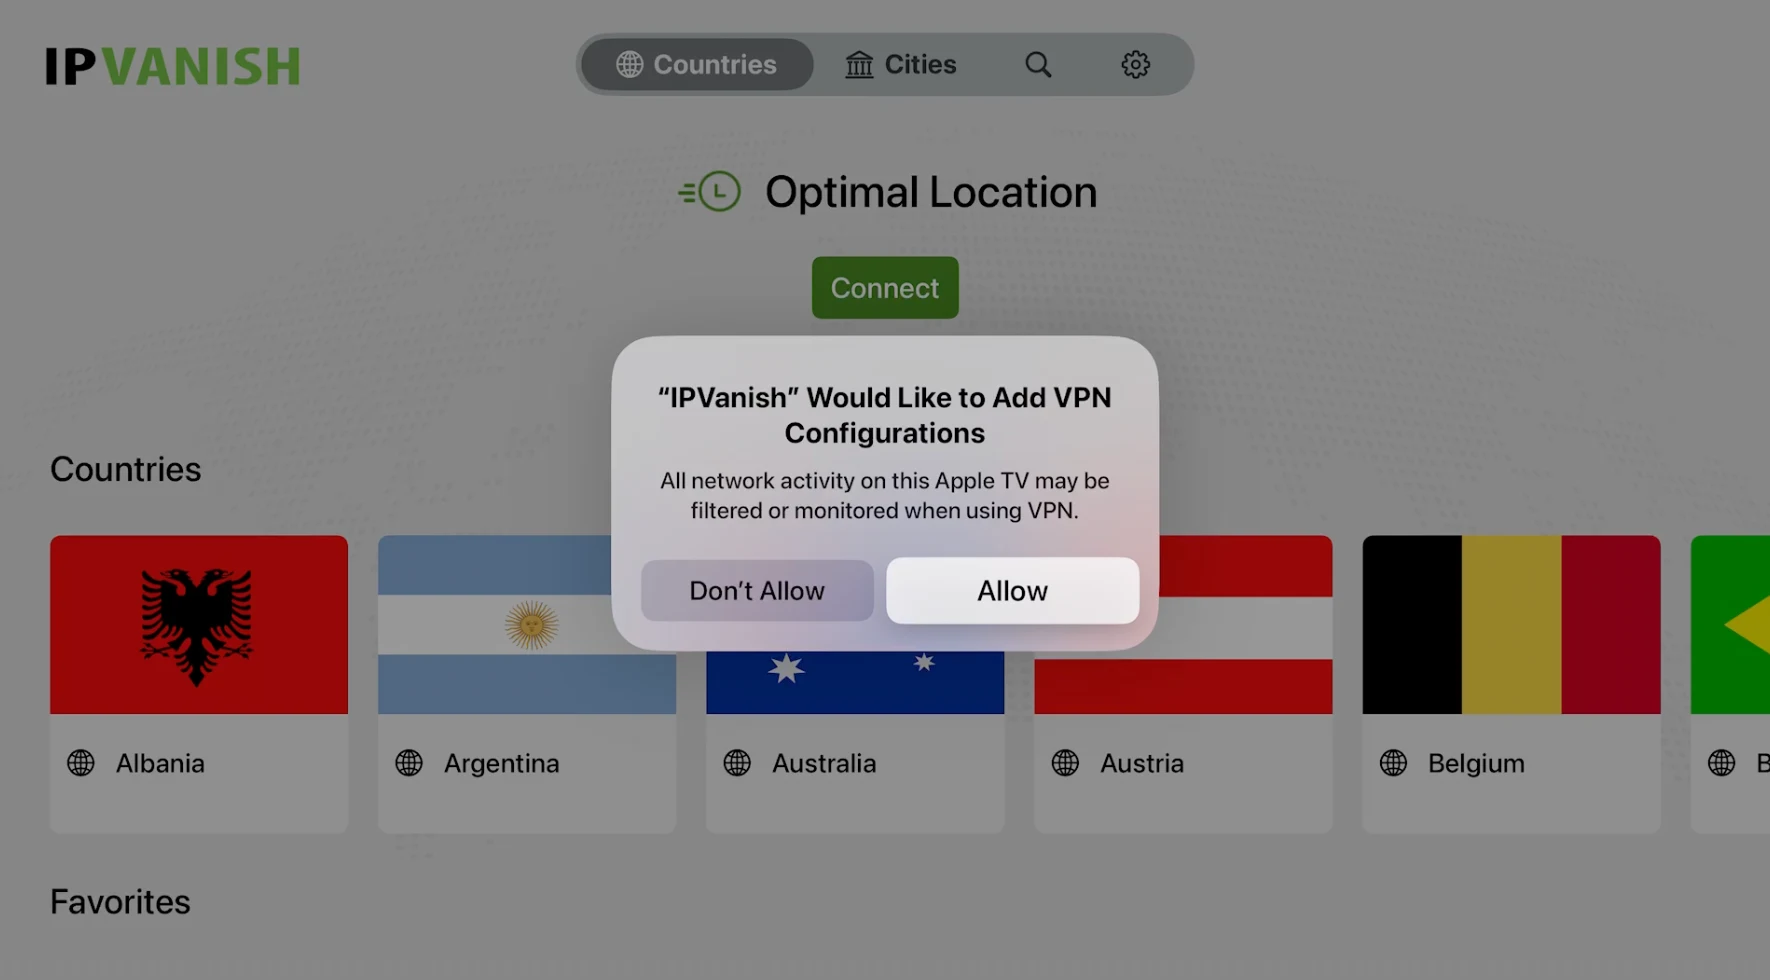 A pop-up notification from the IPVanish app on a device screen, asking permission to add VPN configurations. The message warns that all network activity on this Apple TV may be filtered or monitored when using VPN. The options "Don't Allow" and "Allow" are provided.